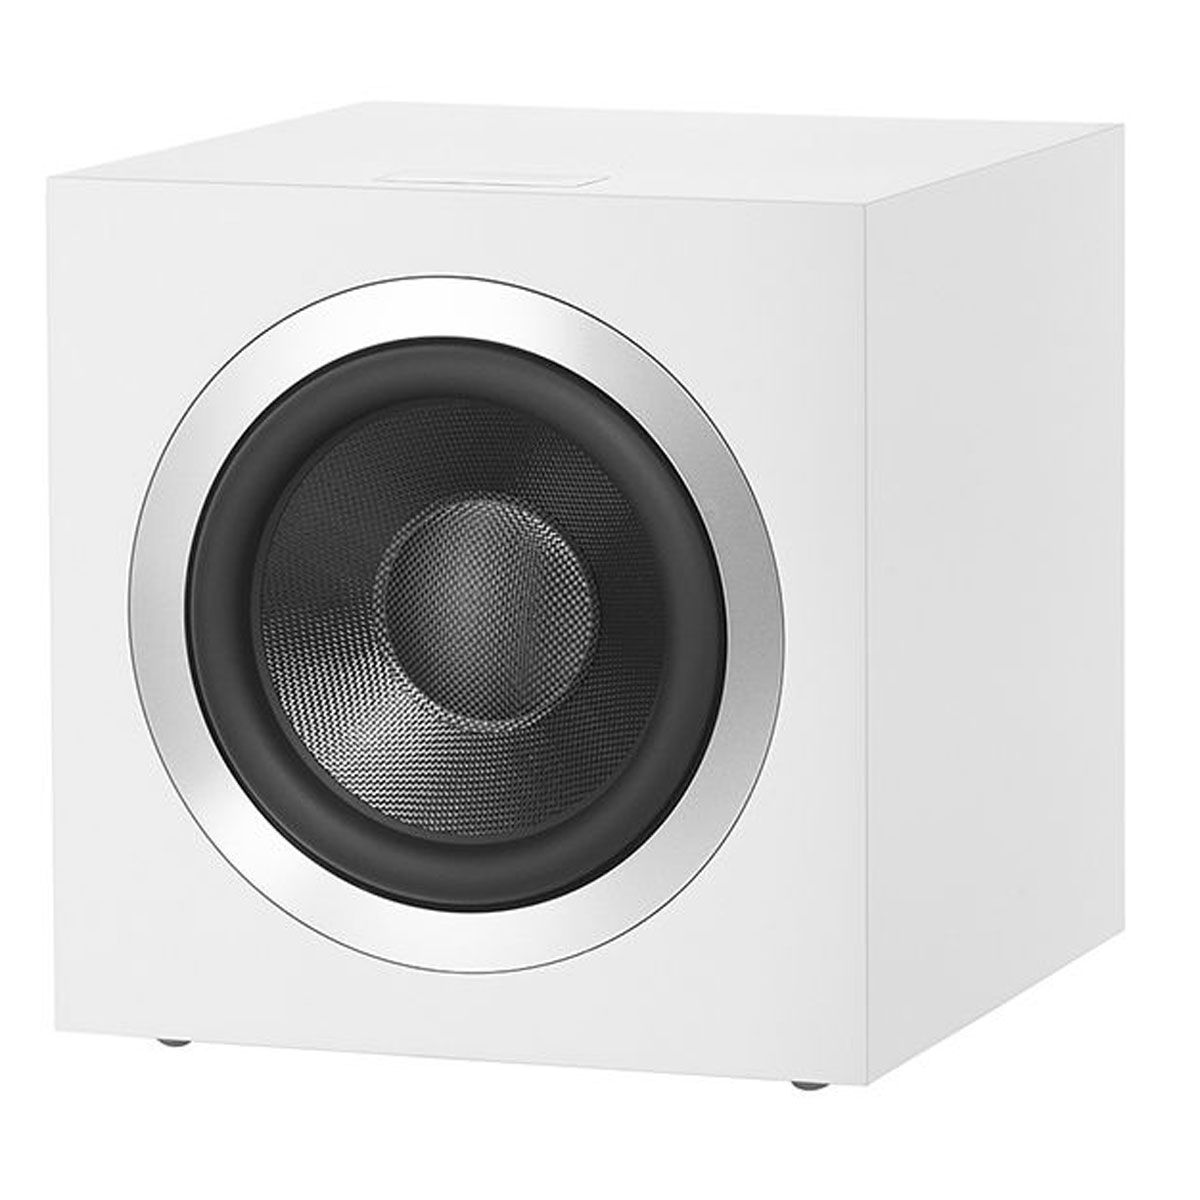 Bowers & Wilkins DB4S Subwoofer - Satin White - Front angled view without grille